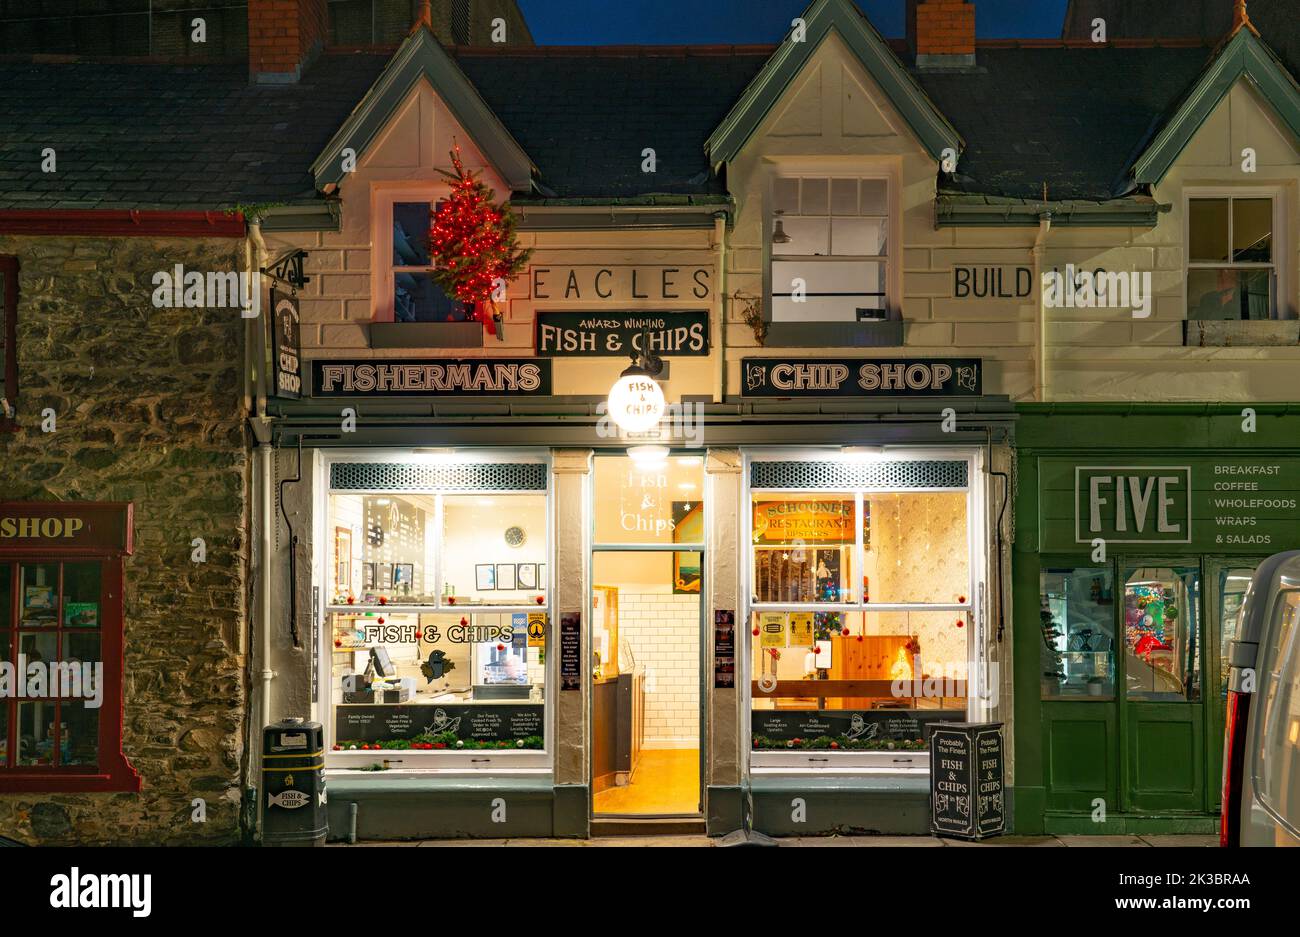 Fisherman's Chip Shop, Castle Street, Conwy, North Wales. Grade 2 listed and Formerly the Eagles Inn up until 1900. This image taken in December 2021. Stock Photo